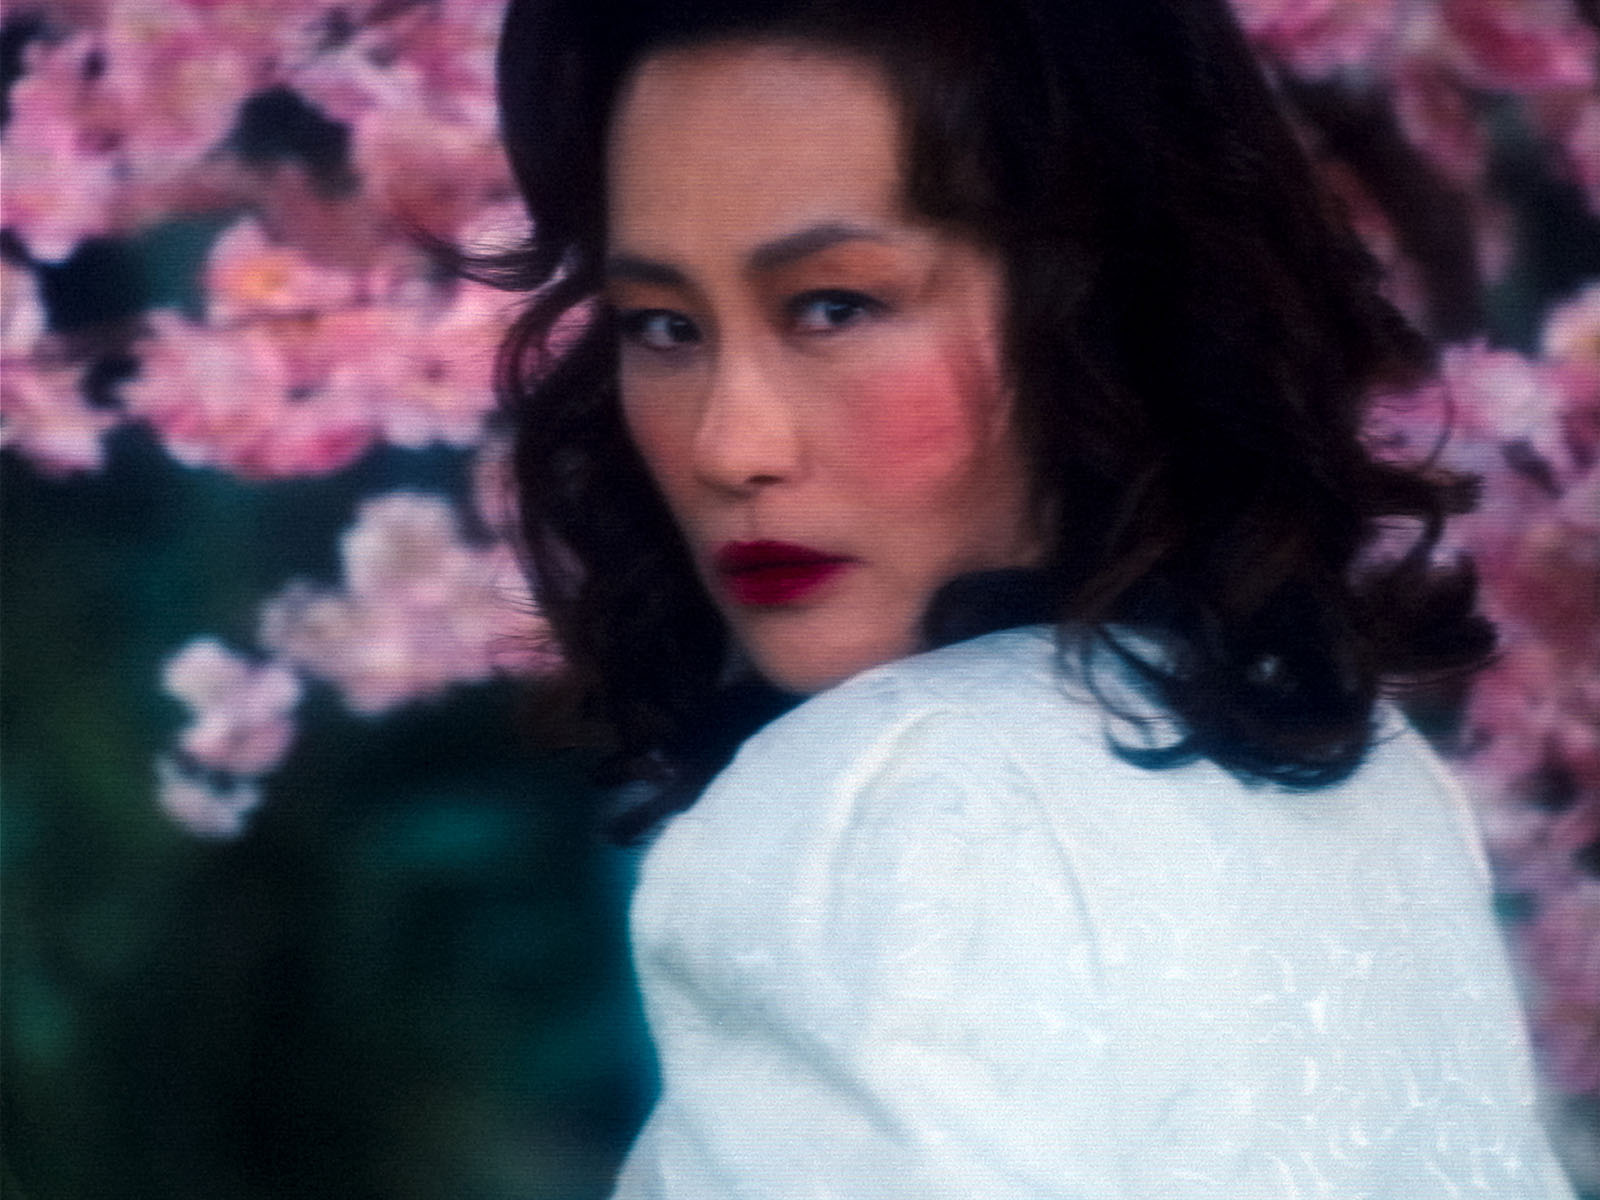 Vivian (played by Vivian Wu) gets the full shaky 80s zoom-in. Image © Apple TV+